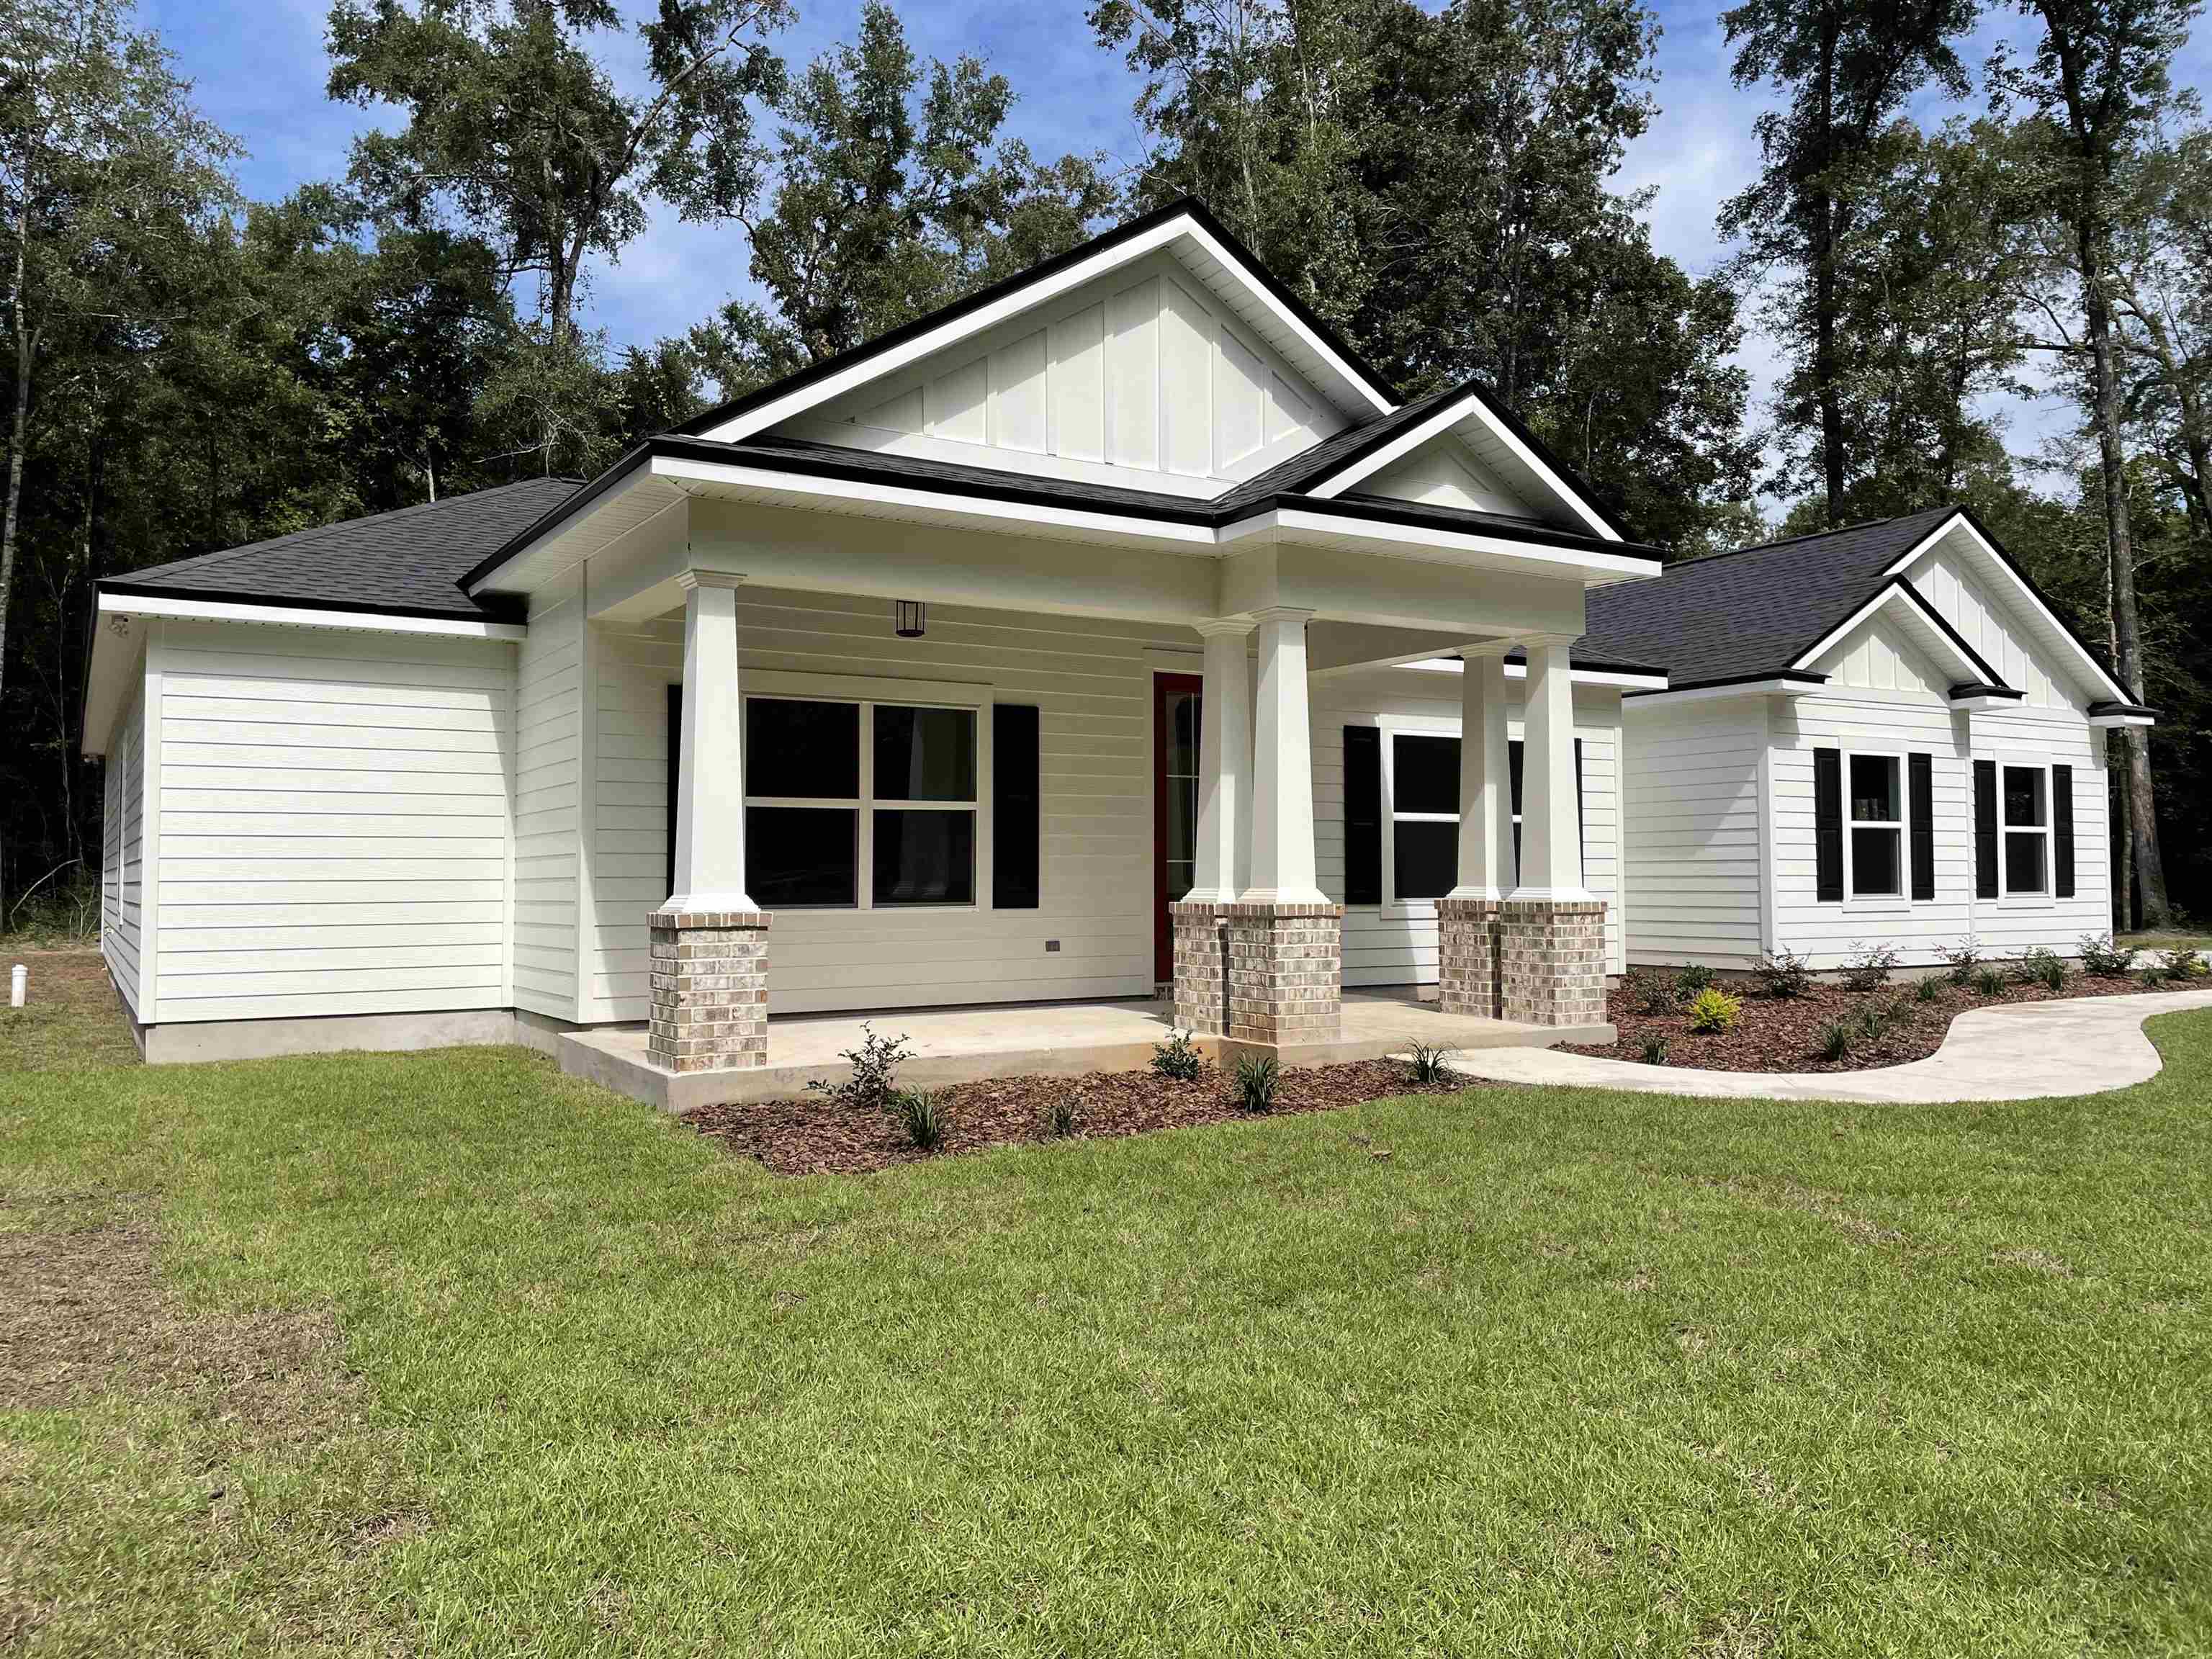 120 Strattonwood Place,CRAWFORDVILLE,Florida 32327,4 Bedrooms Bedrooms,3 BathroomsBathrooms,Detached single family,120 Strattonwood Place,369234